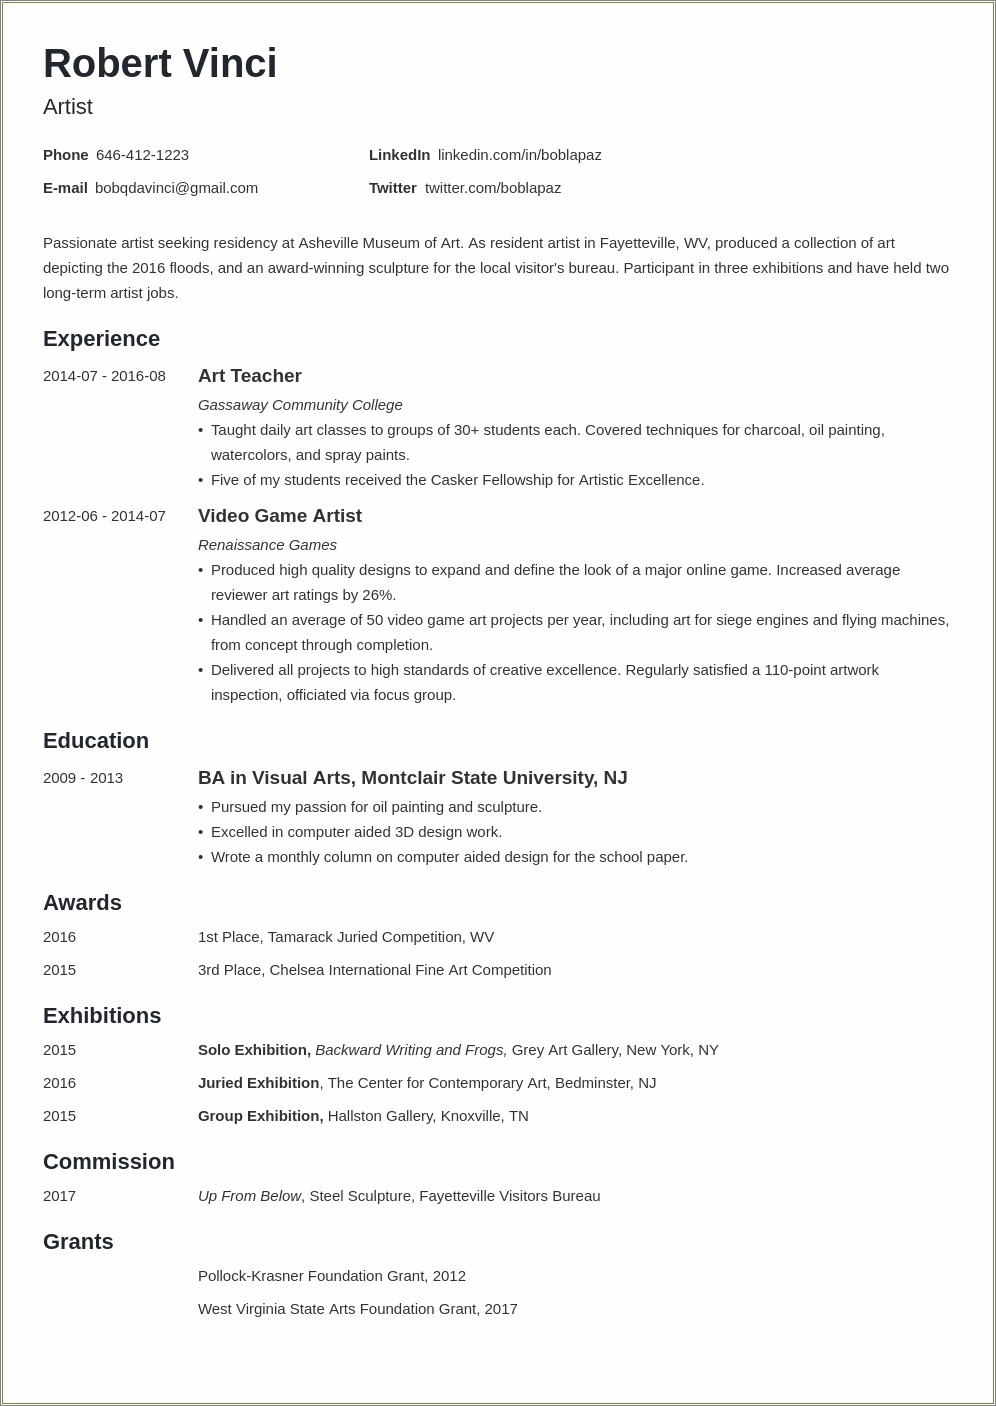 Objectives On A Resume For A Visual Inspector